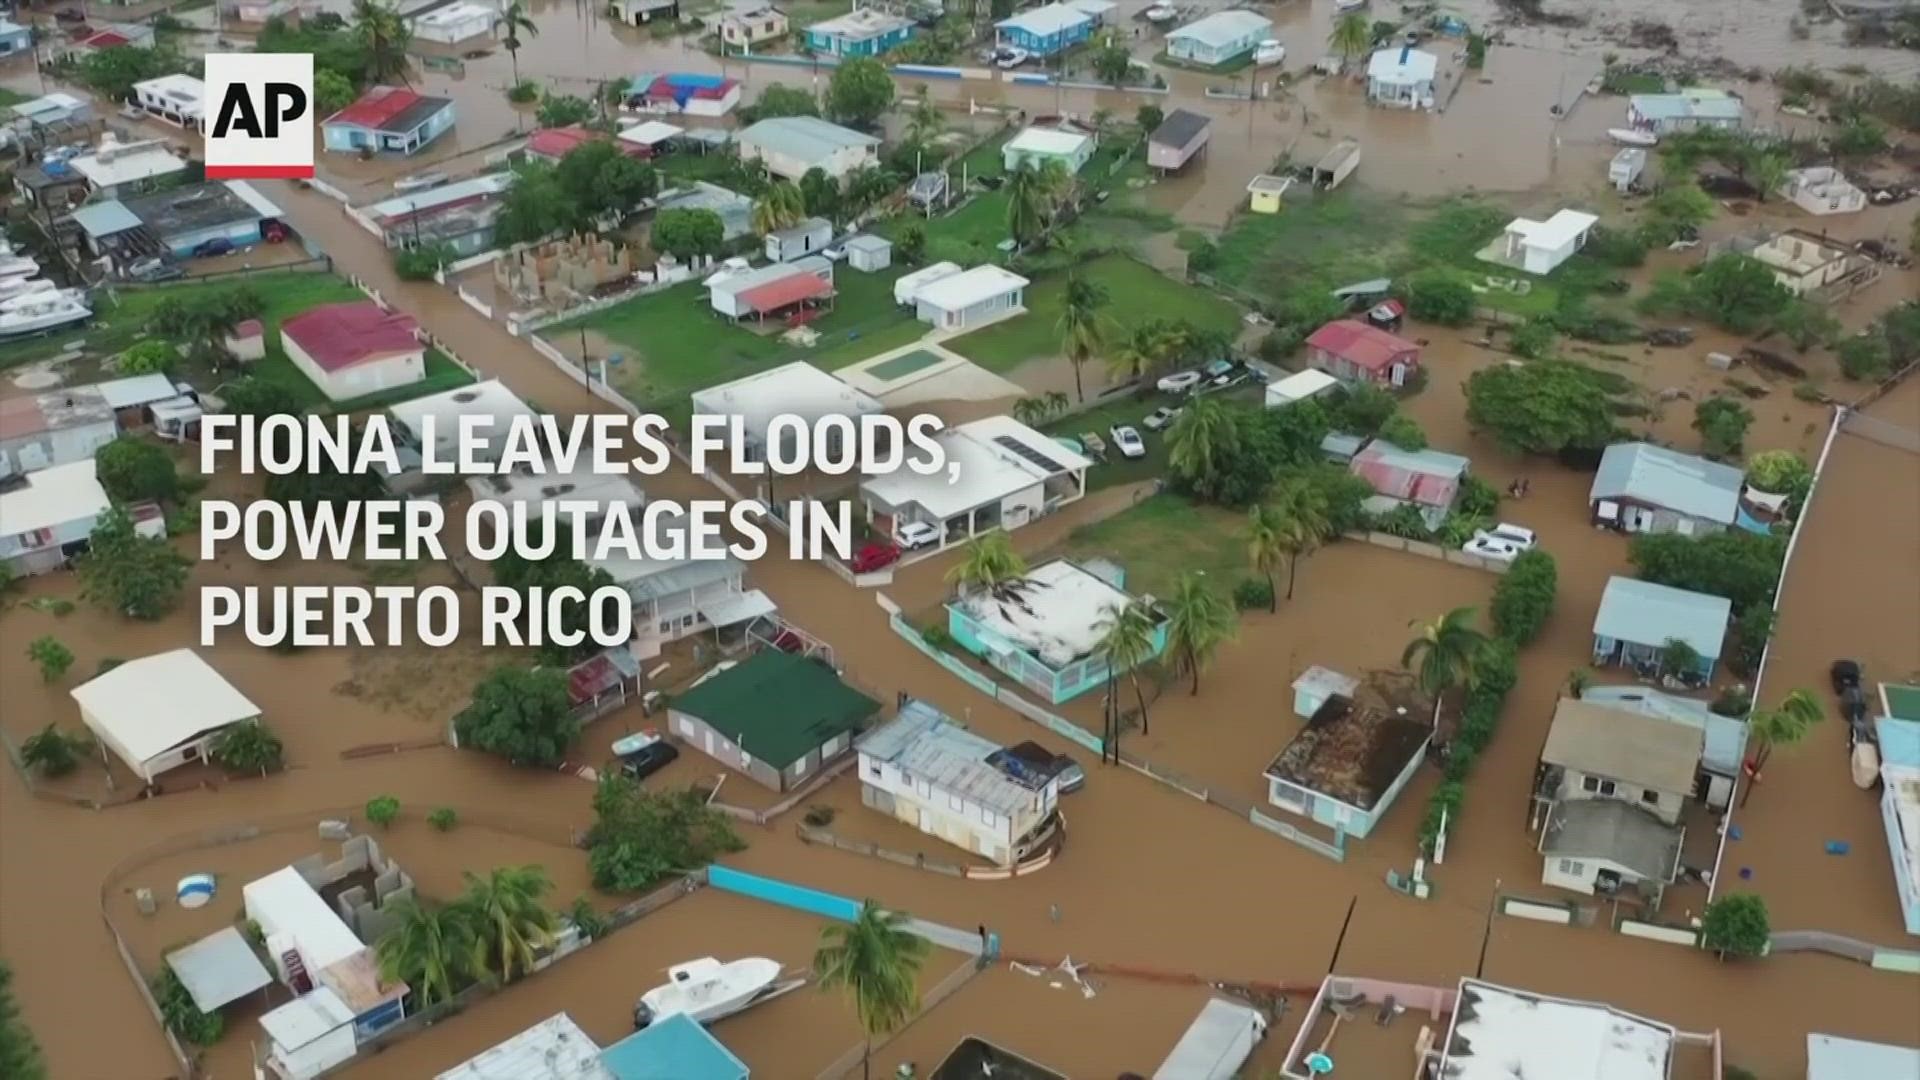 Hurricane Fiona poured more rain on Puerto Rico on Monday, a day after the storm left most of the island without electricity and drinking water.